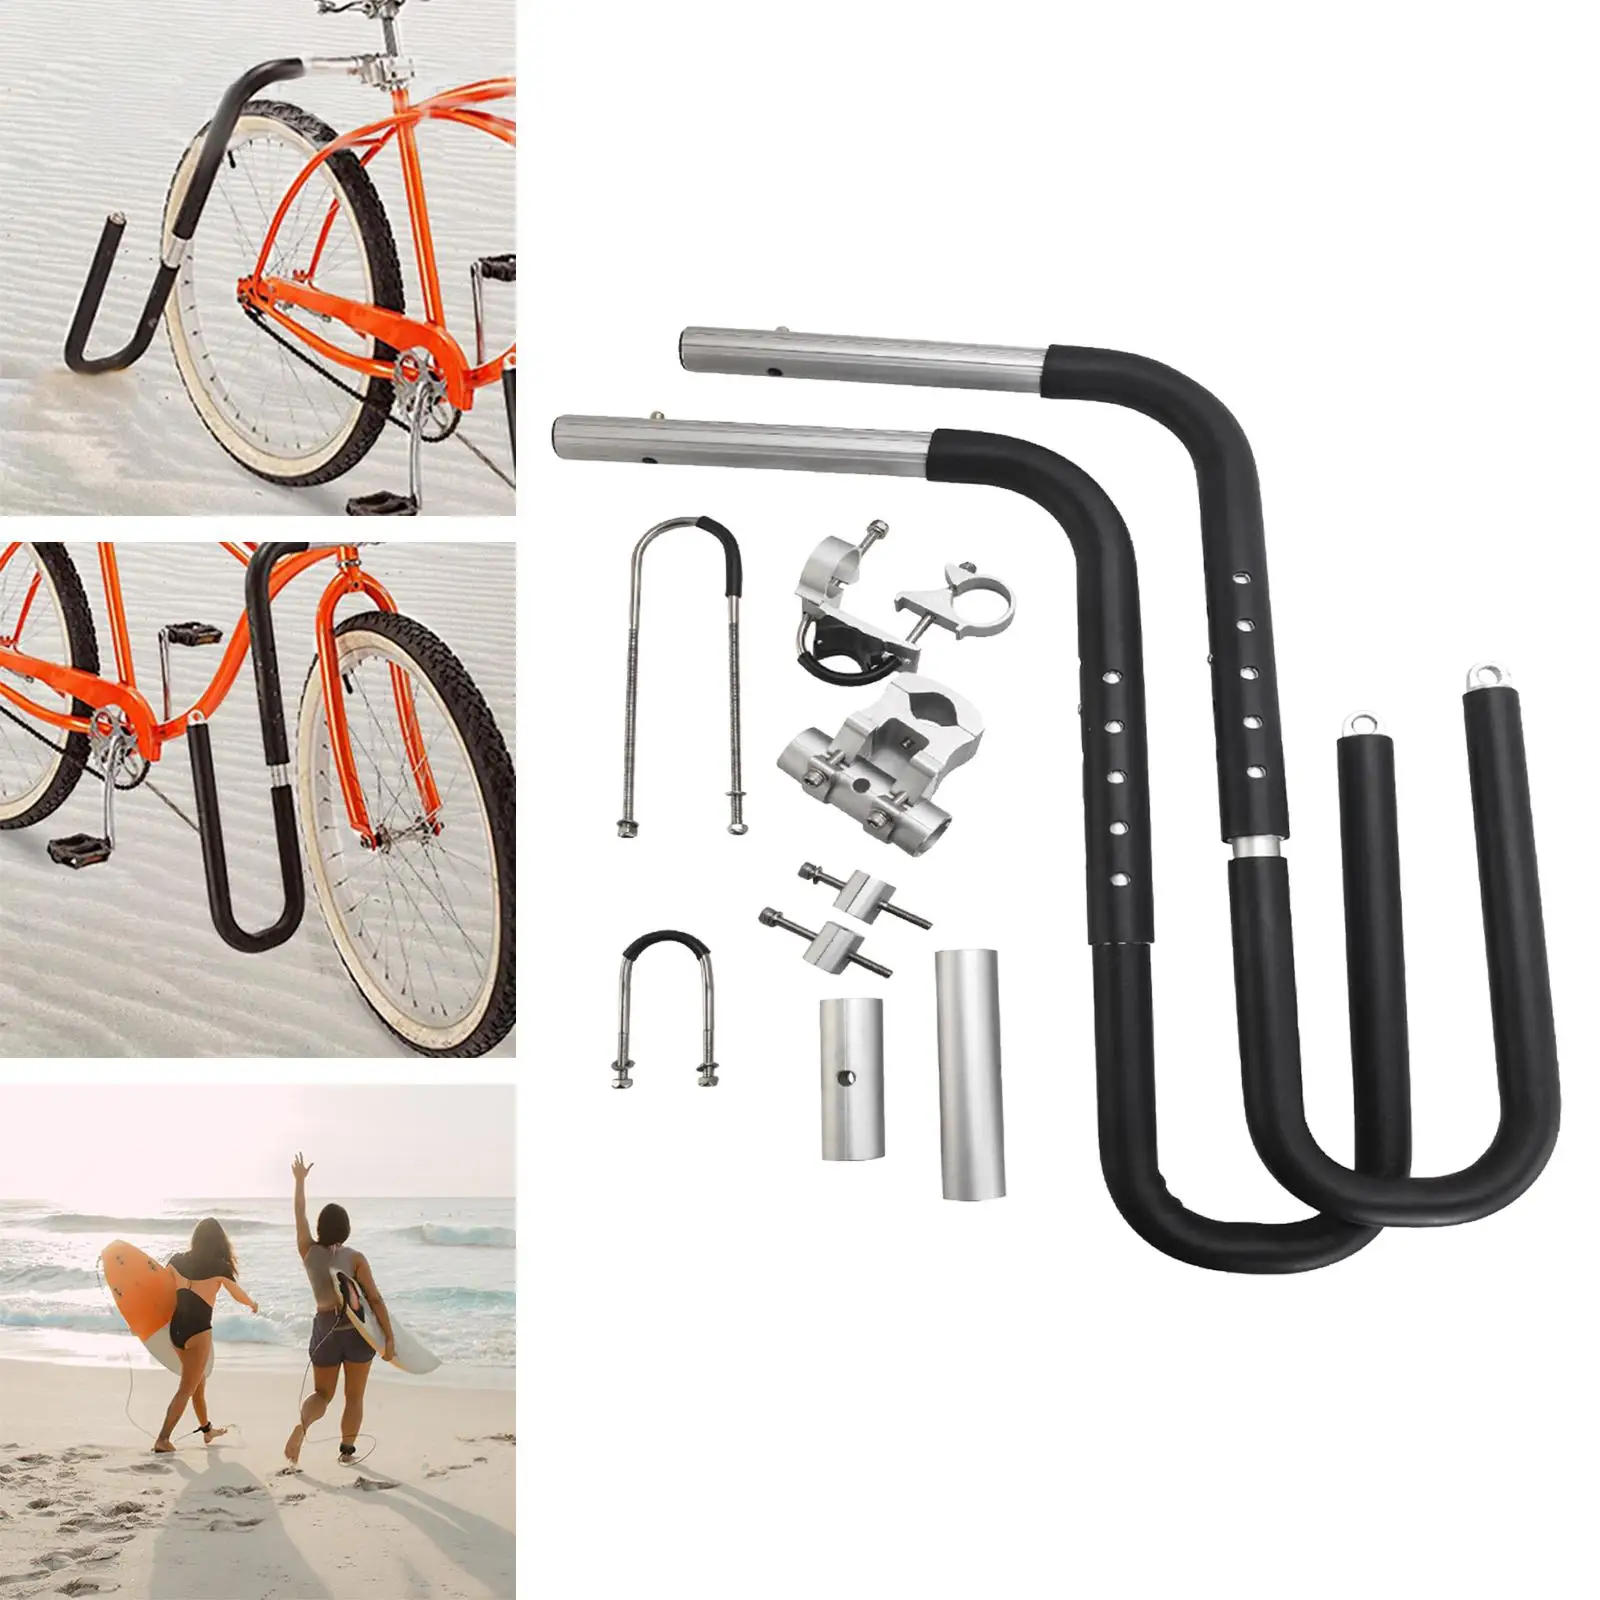 Universal Motorcycle Surfboard Carrying Holder Frame Portable Bicycle Surfing Board Wakeboard Carrier Mount Racks Accessories